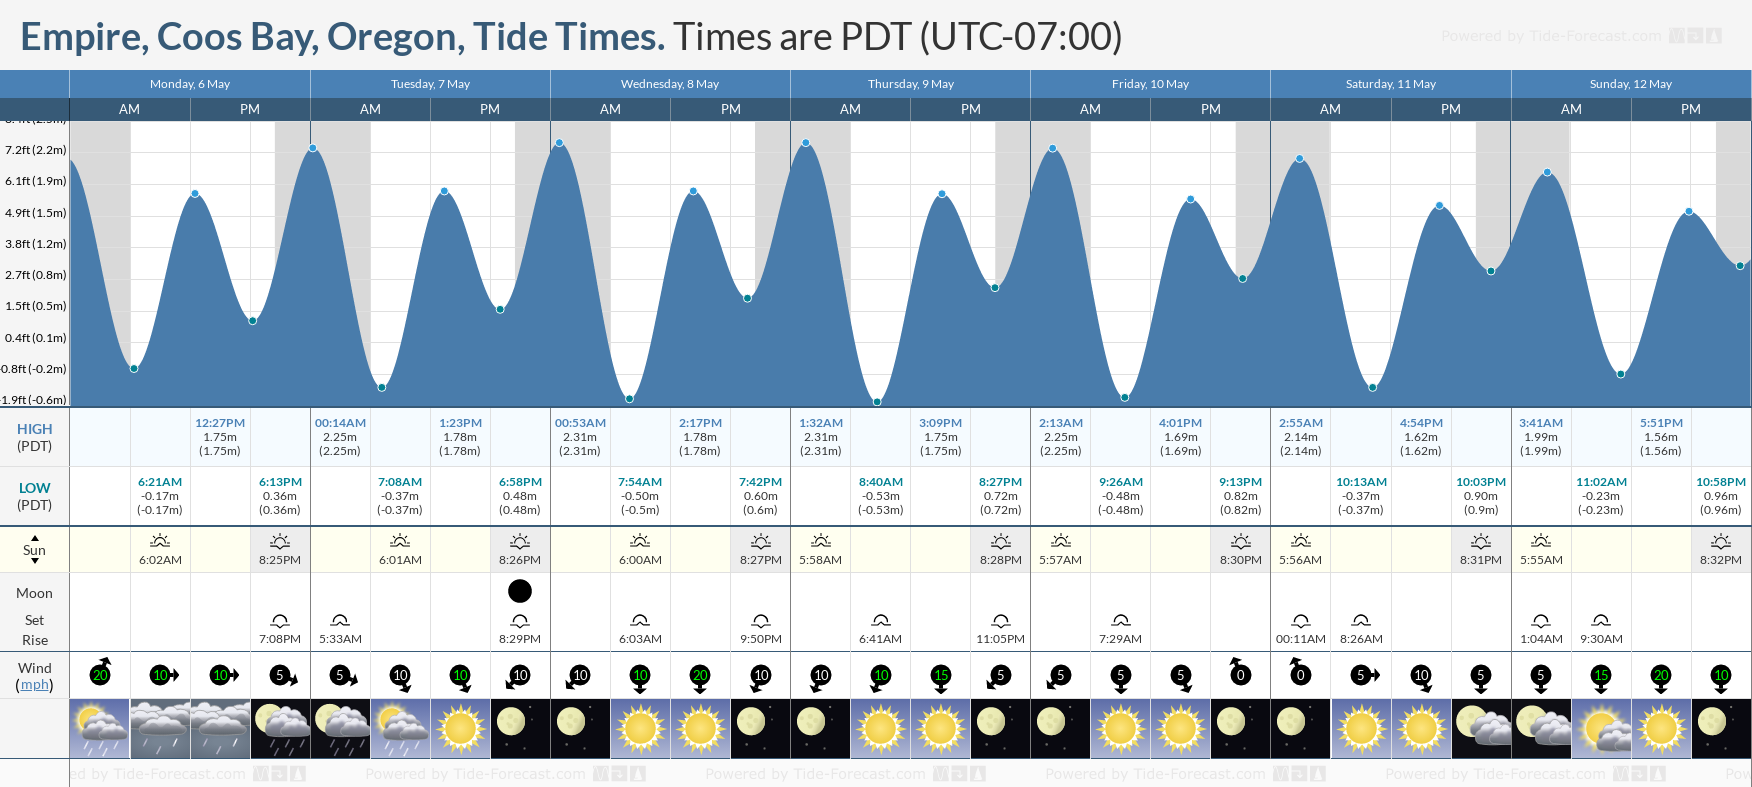 Empire, Coos Bay, Oregon Tide Chart including high and low tide tide times for the next 7 days